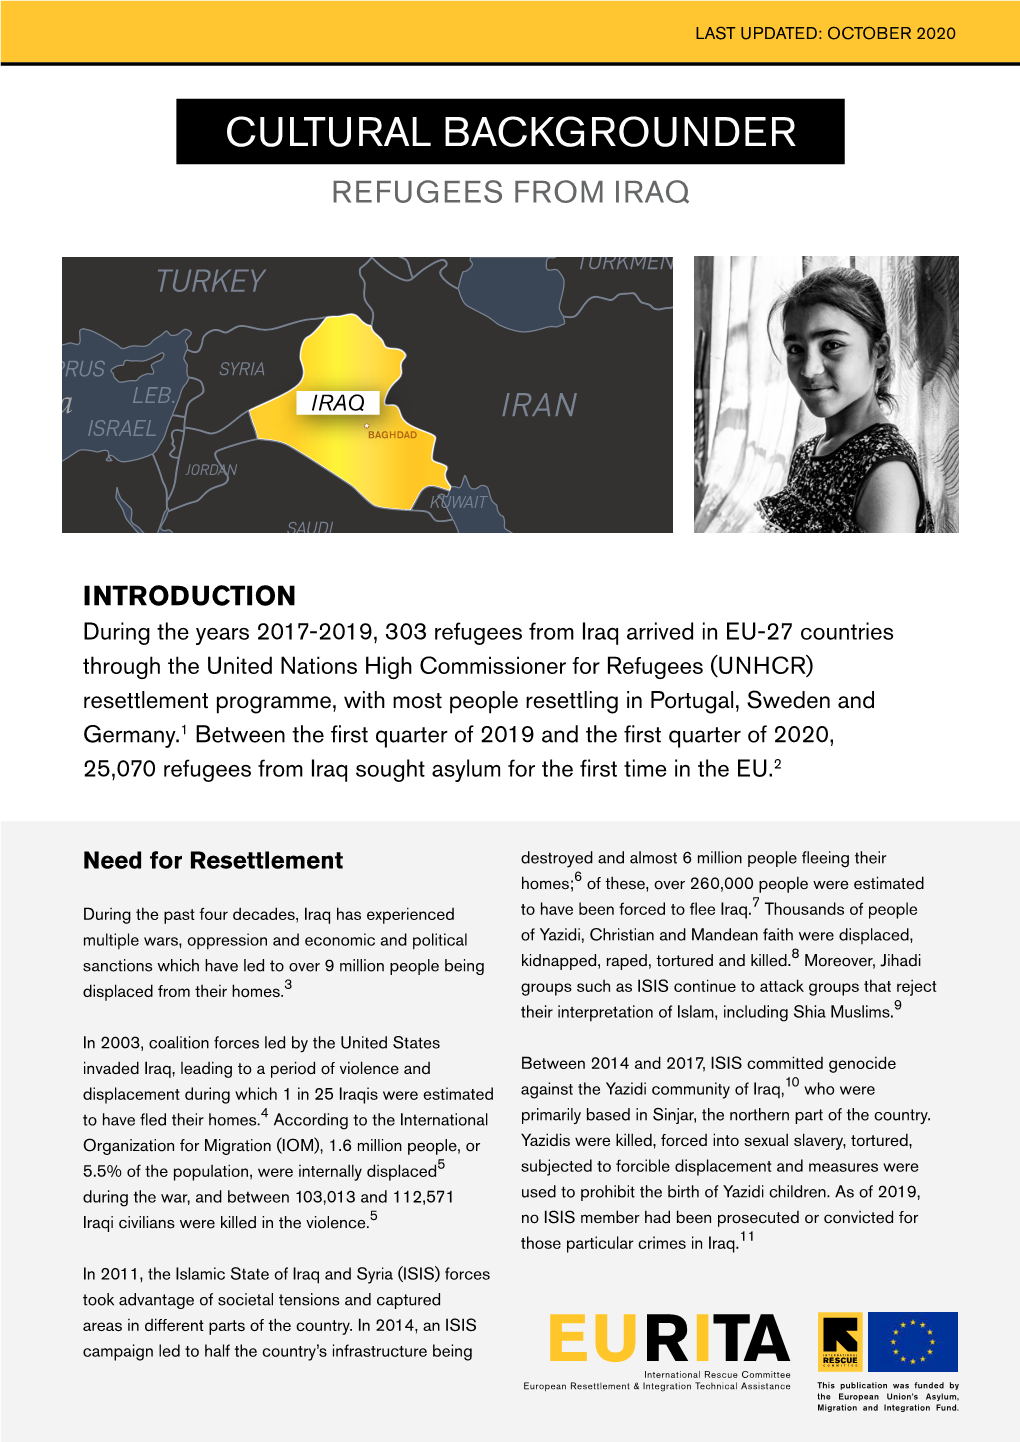 Cultural Backgrounder: Refugees from Iraq